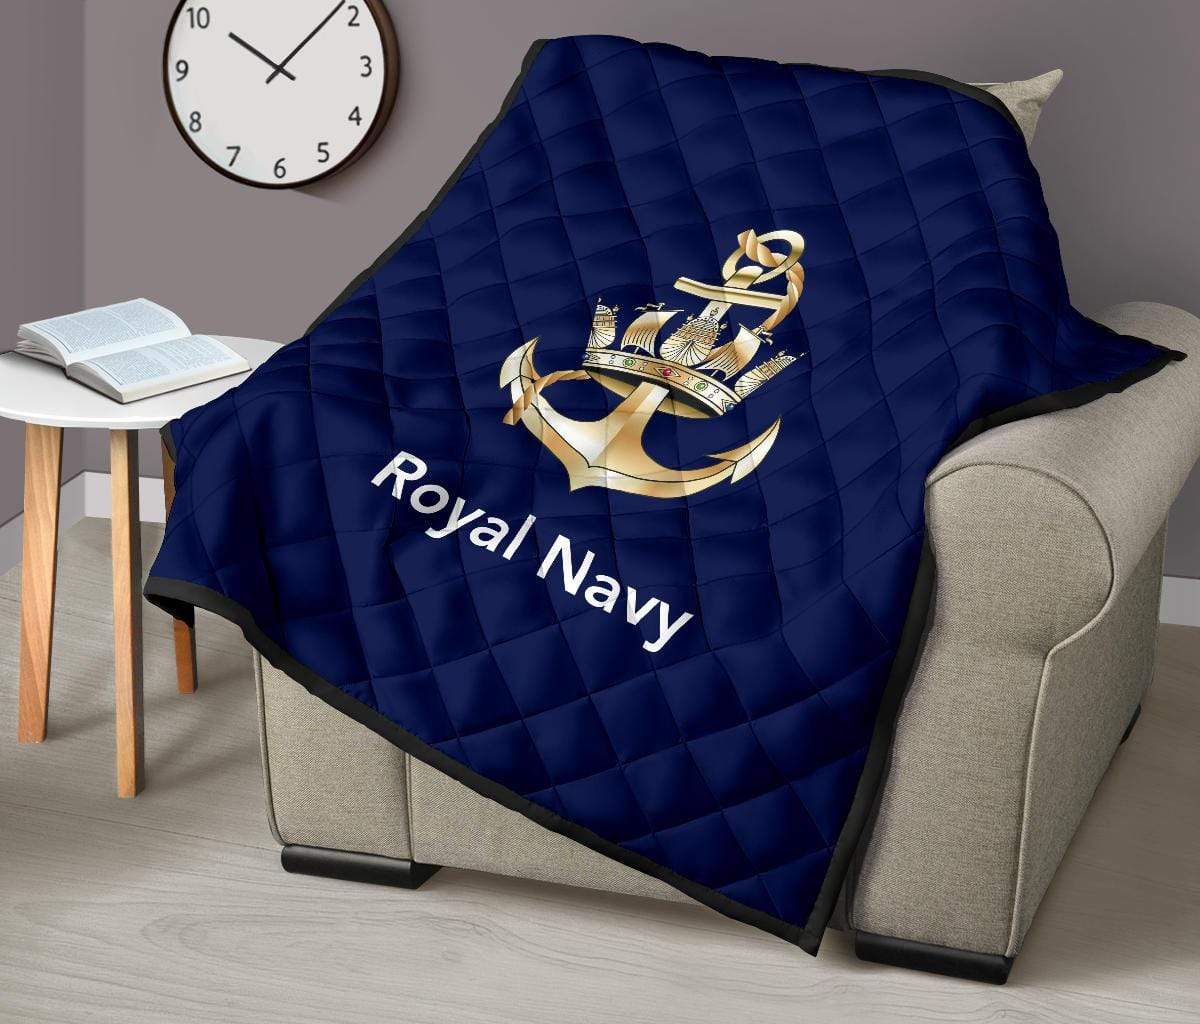 quilt Lap Blanket (45 x 50 inches / 114 x 127 cm) Royal Navy Quilted Blanket